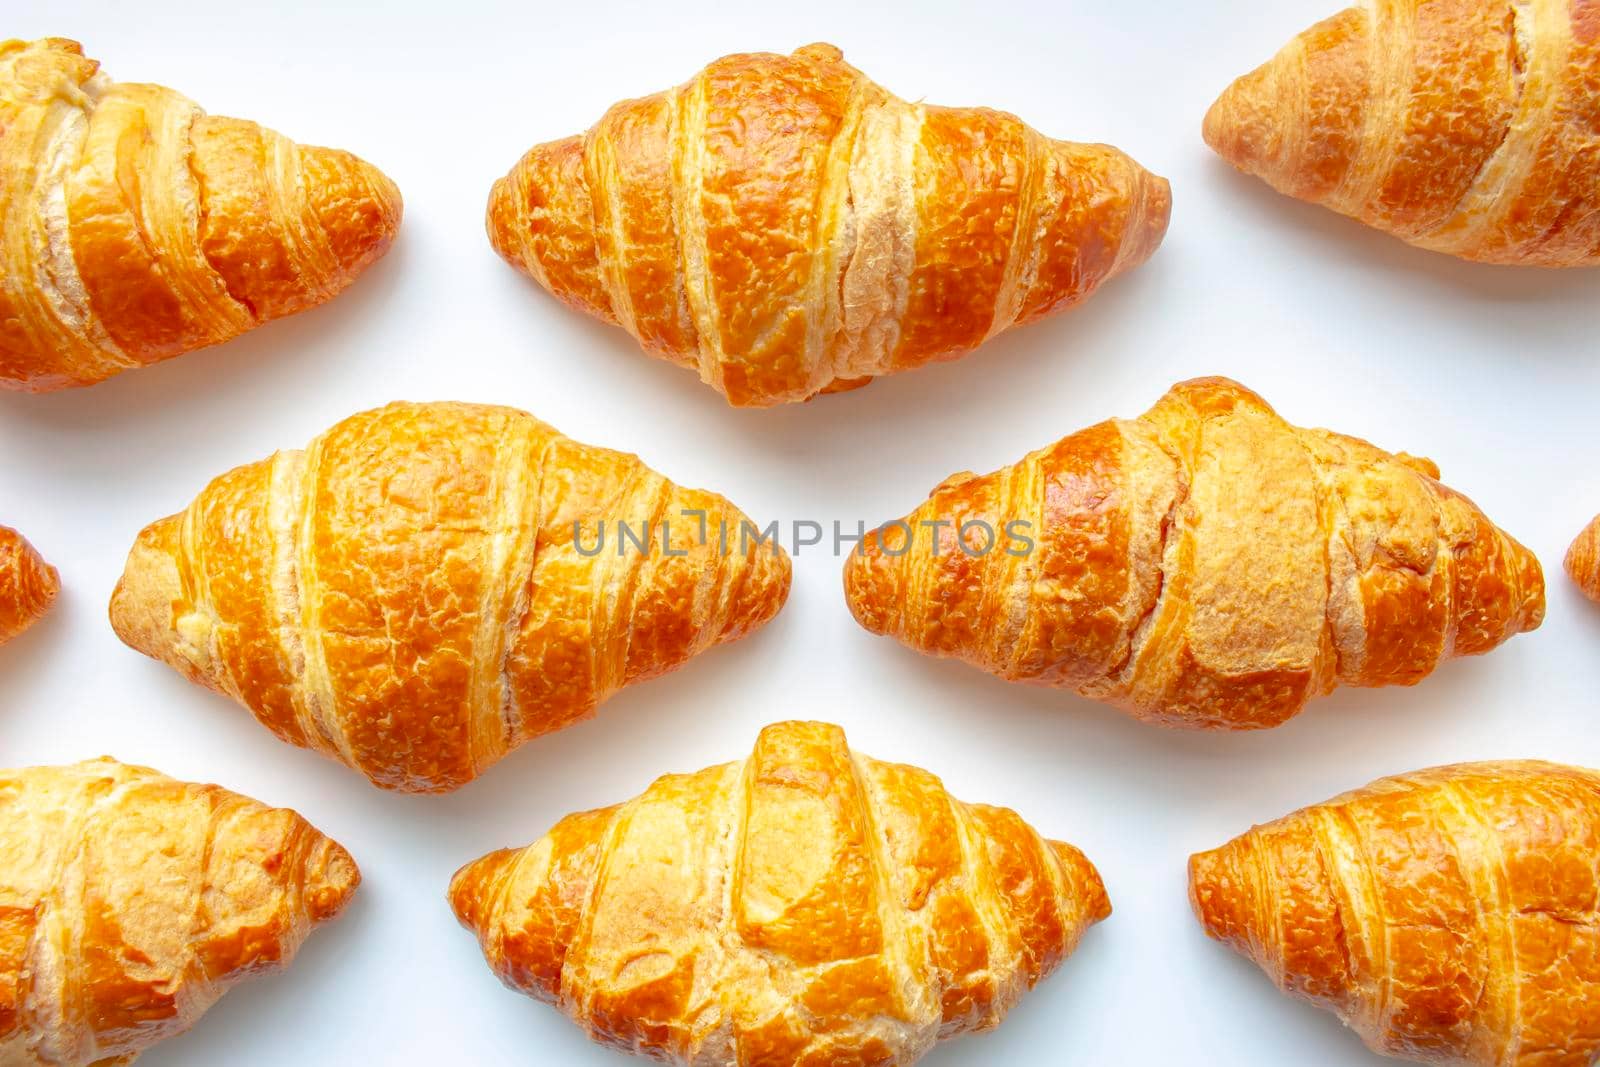 Croissants on a white background. Buttery, flaky, viennoiserie pastry of Austrian origin, but mostly associated with France.